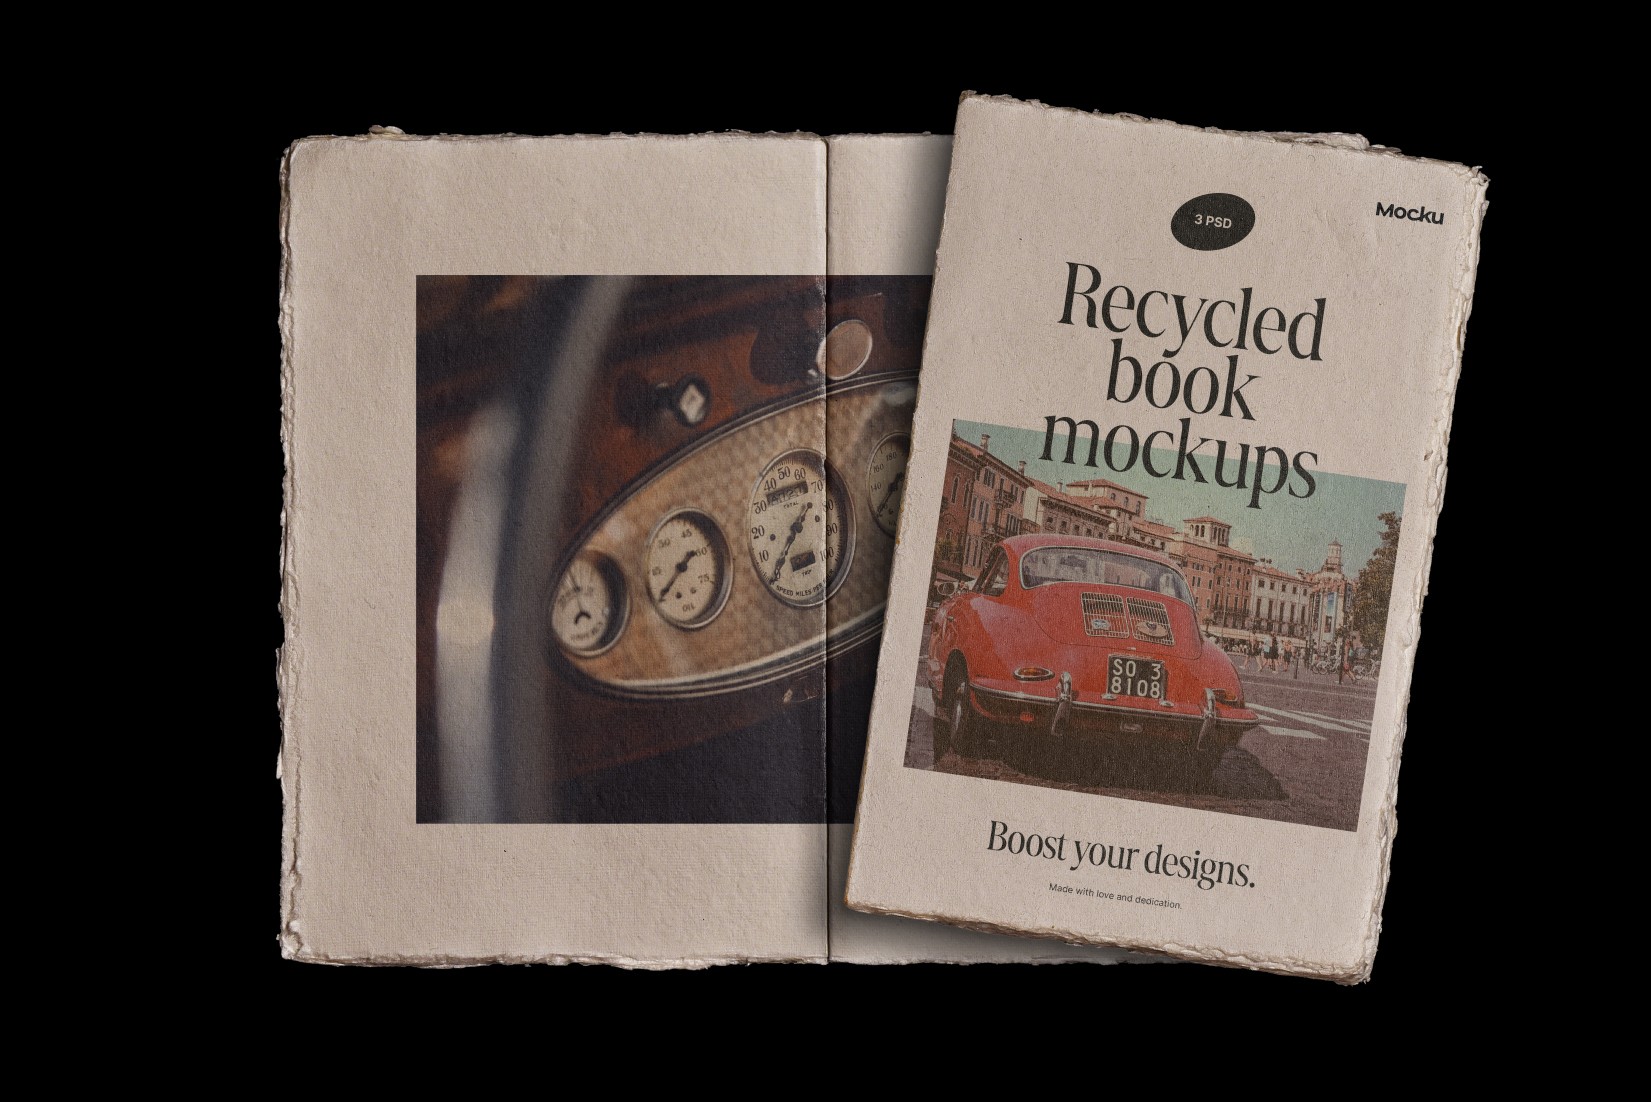 Recycled book mockups